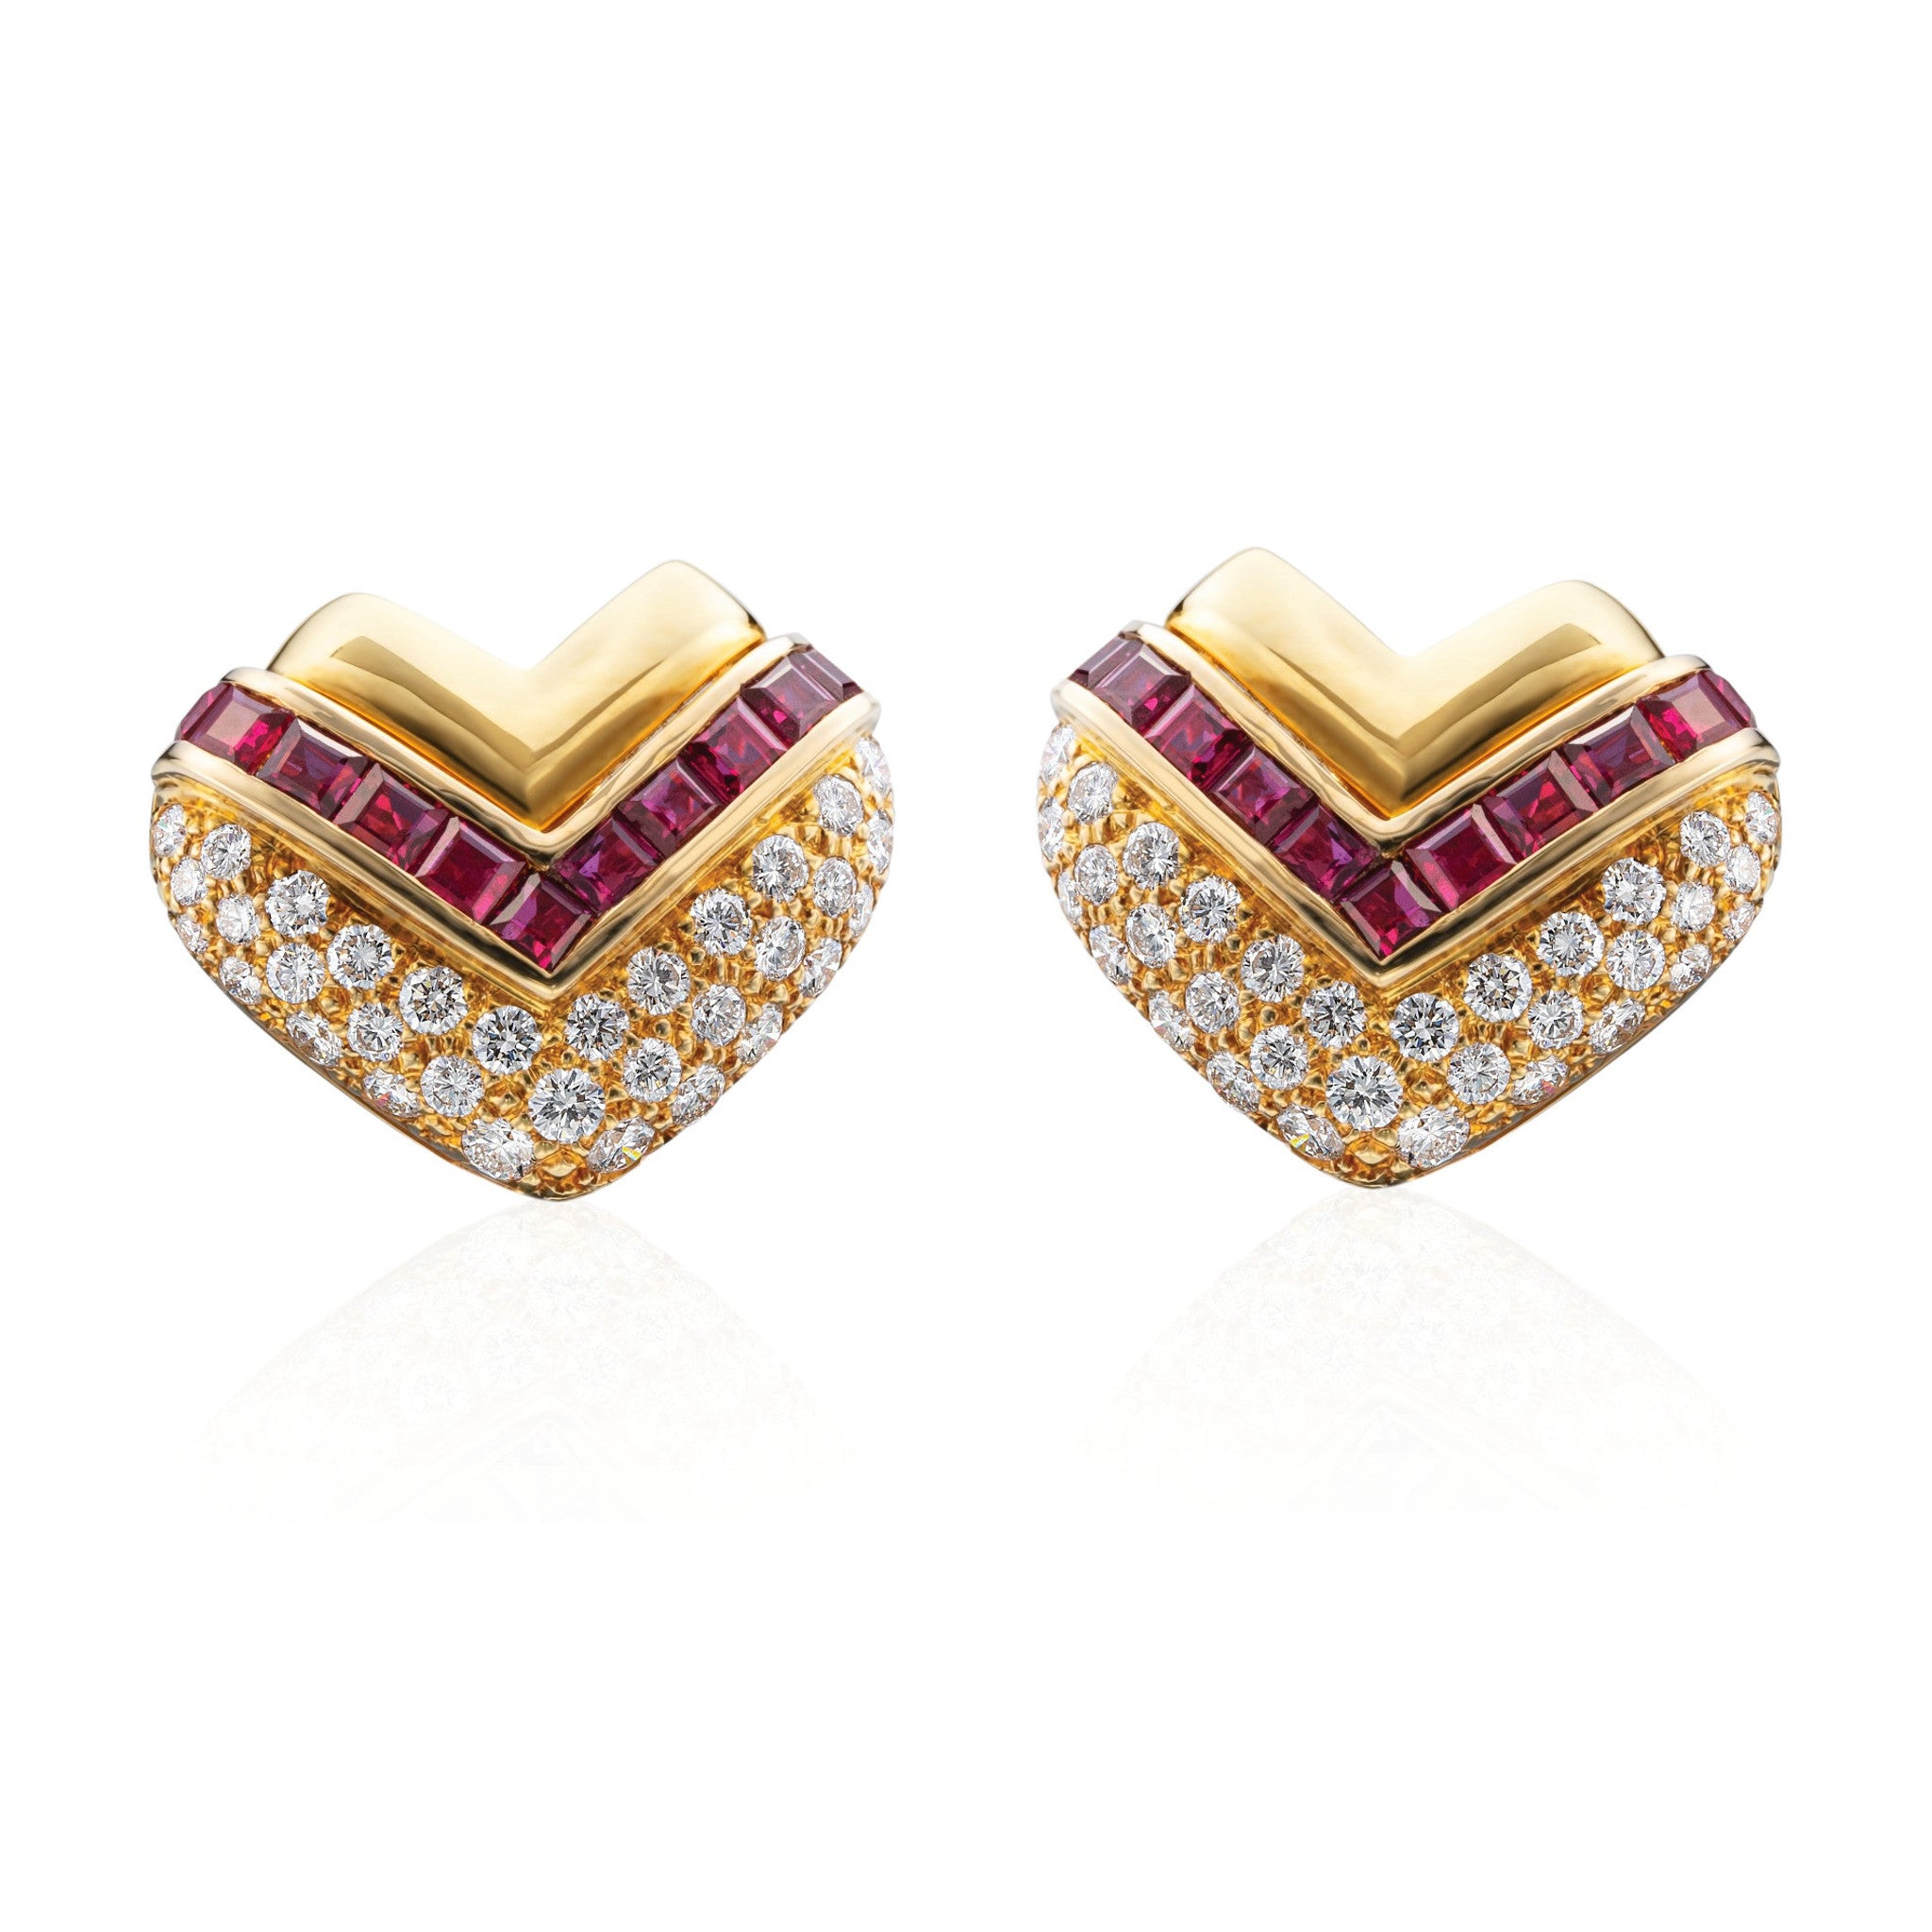 Diamond and Square Cut Ruby Heart Earclips in 18k Gold